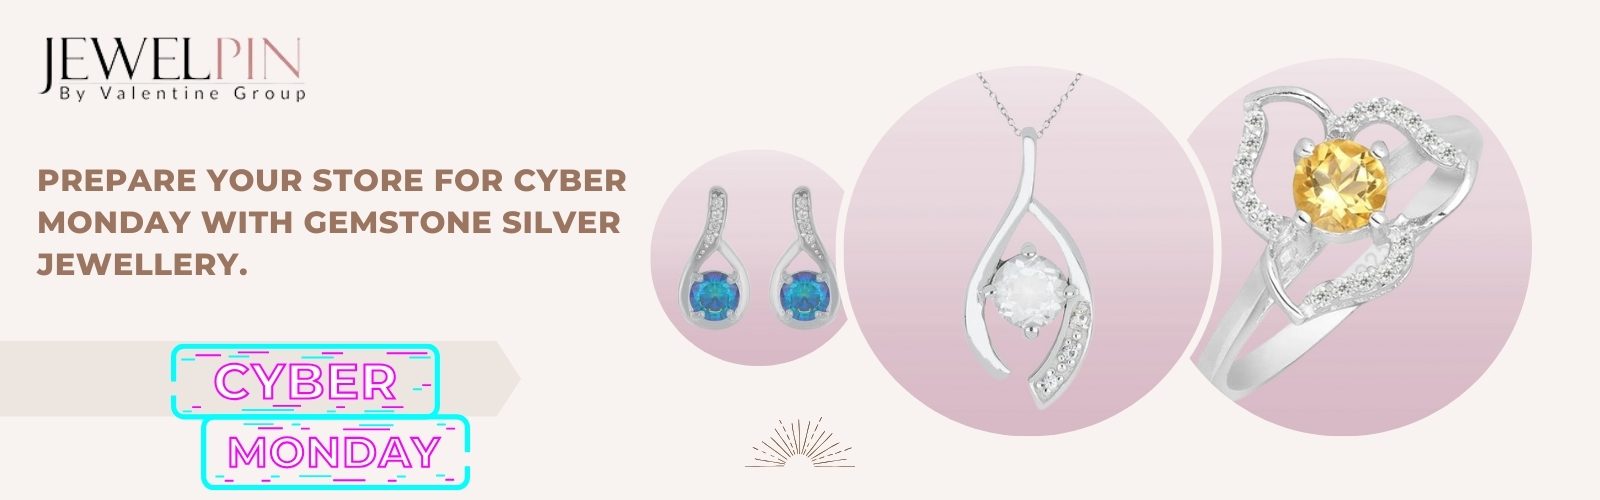 prepare your store for cyber monday with gemstone silver jewellery